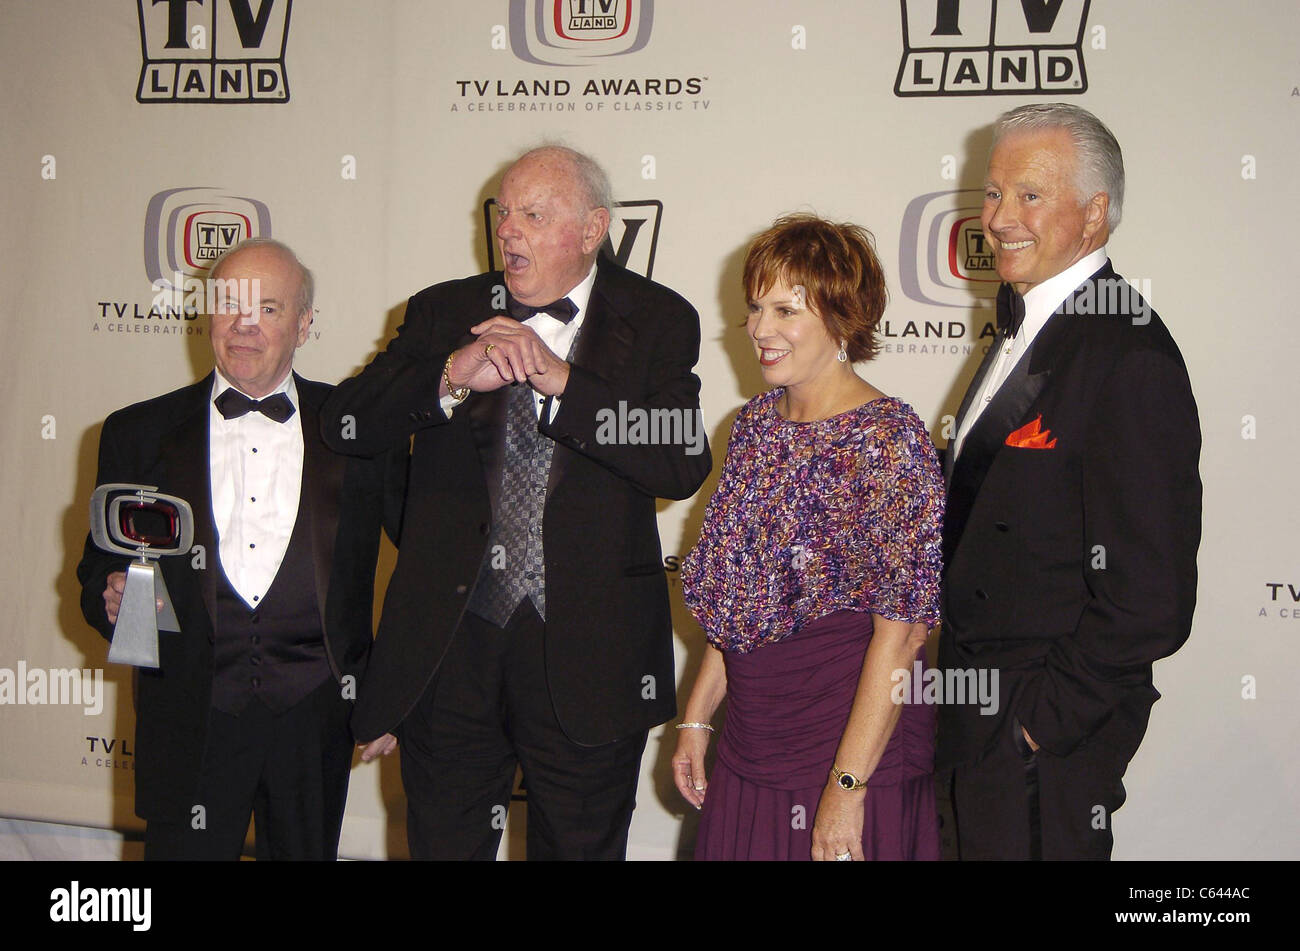 Tim Conway, Harvey Korman, Vicki Lawrence, Lyle Waggoner in the press room for TV LAND AWARDS: A CELEBRATION OF CLASSIC TV, Santa Monica Airport Barker Hangar, Santa Monica, CA, March 13, 2005. Photo by: Michael Germana/Everett Collection Stock Photo